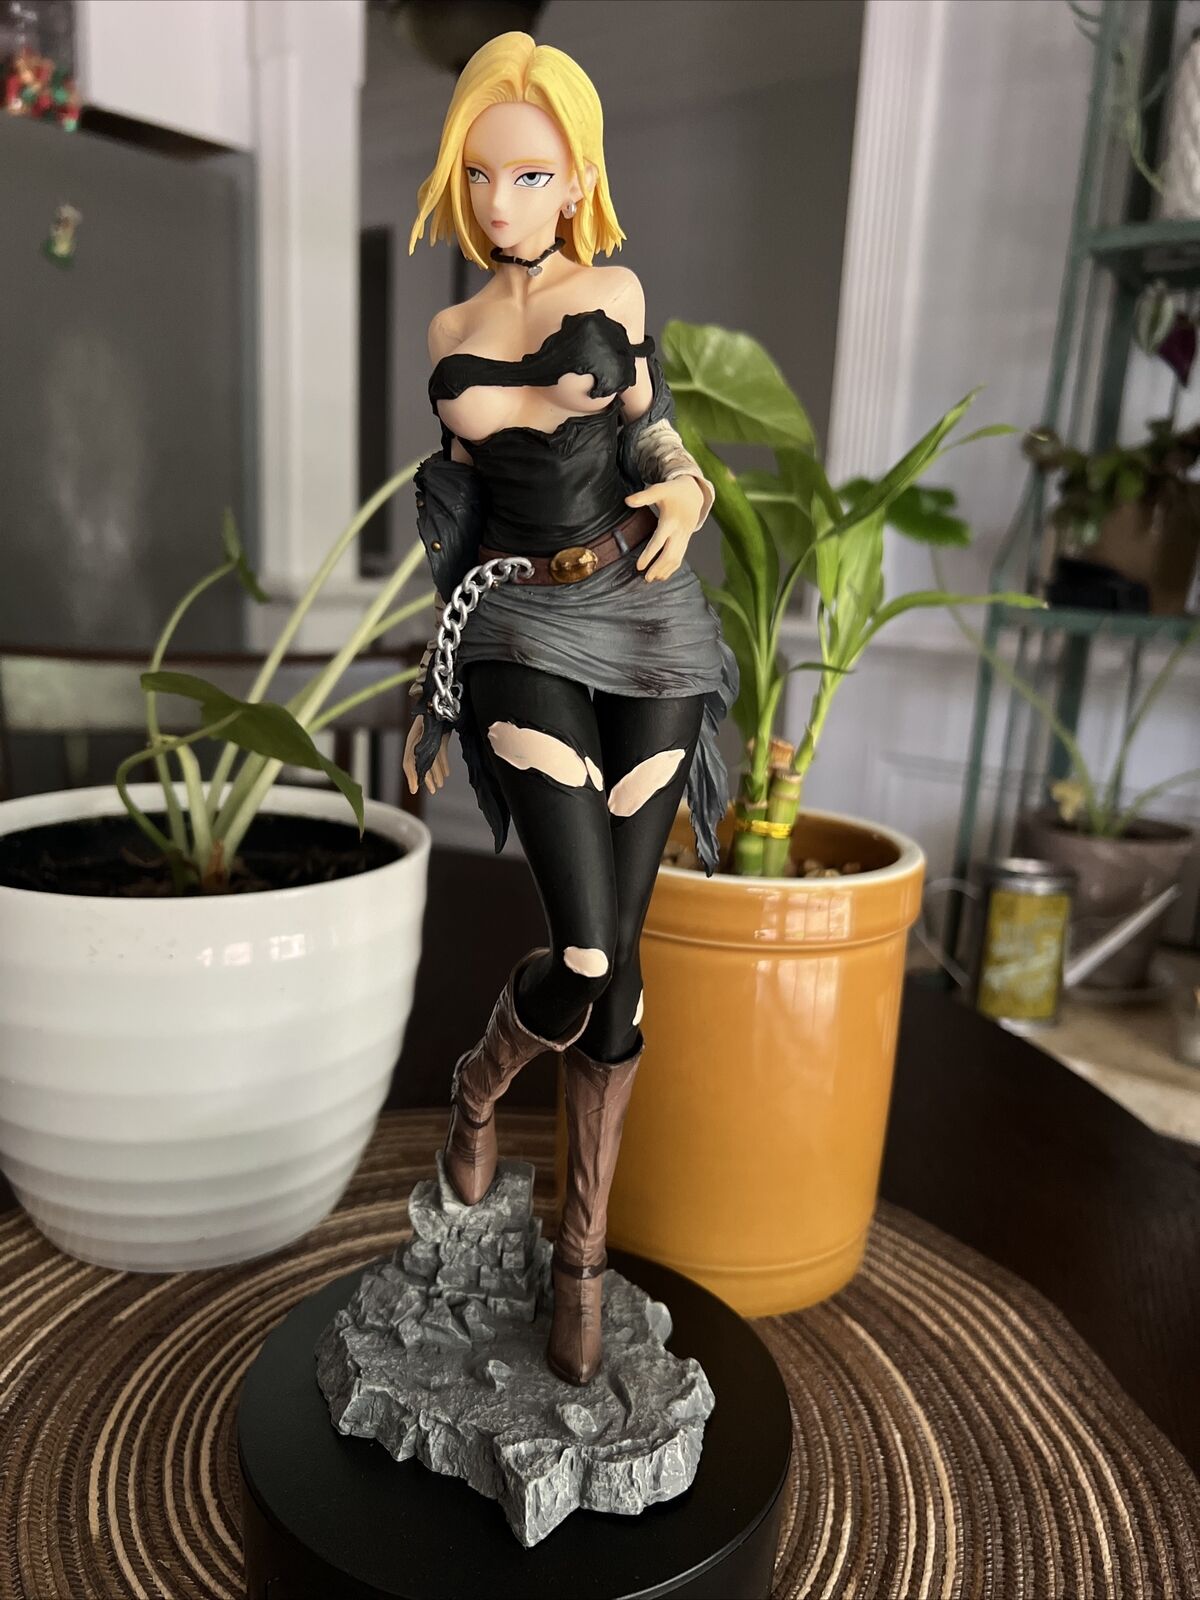 Anime Dragon Ball Z Android 18 Fashion Hot Girl 2 heads Figure Statue Toy 11.5”